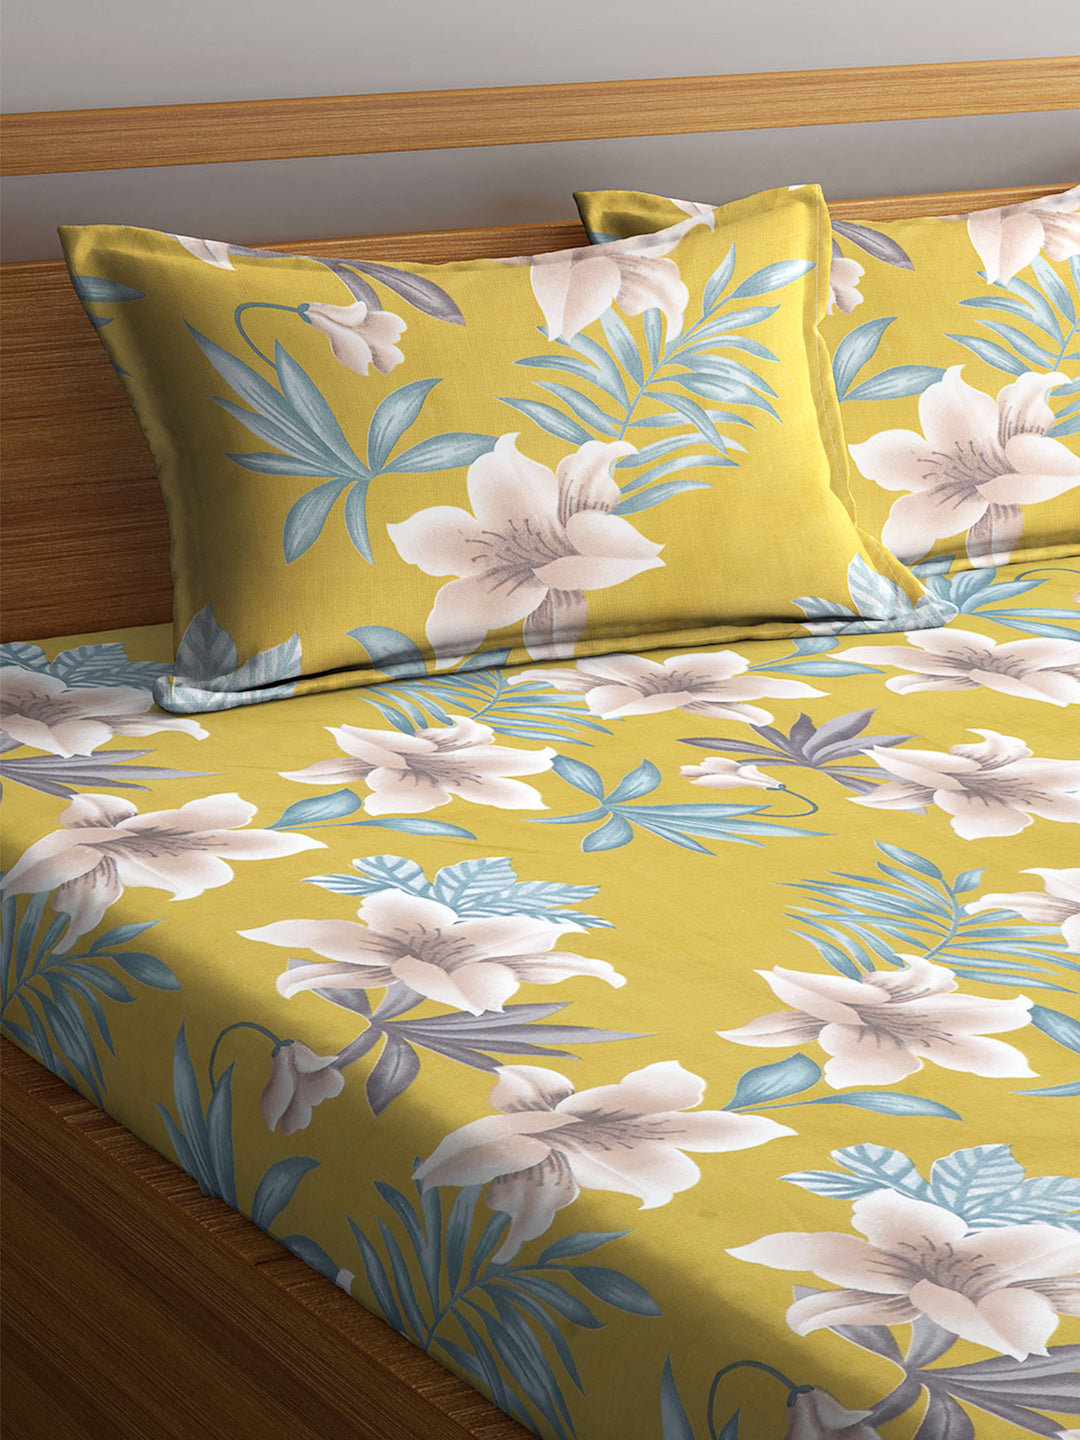 Arrabi Green Floral TC Cotton Blend Double Size Fitted Bedsheet with 2 Pillow Cover ( 250 x 225 cm)